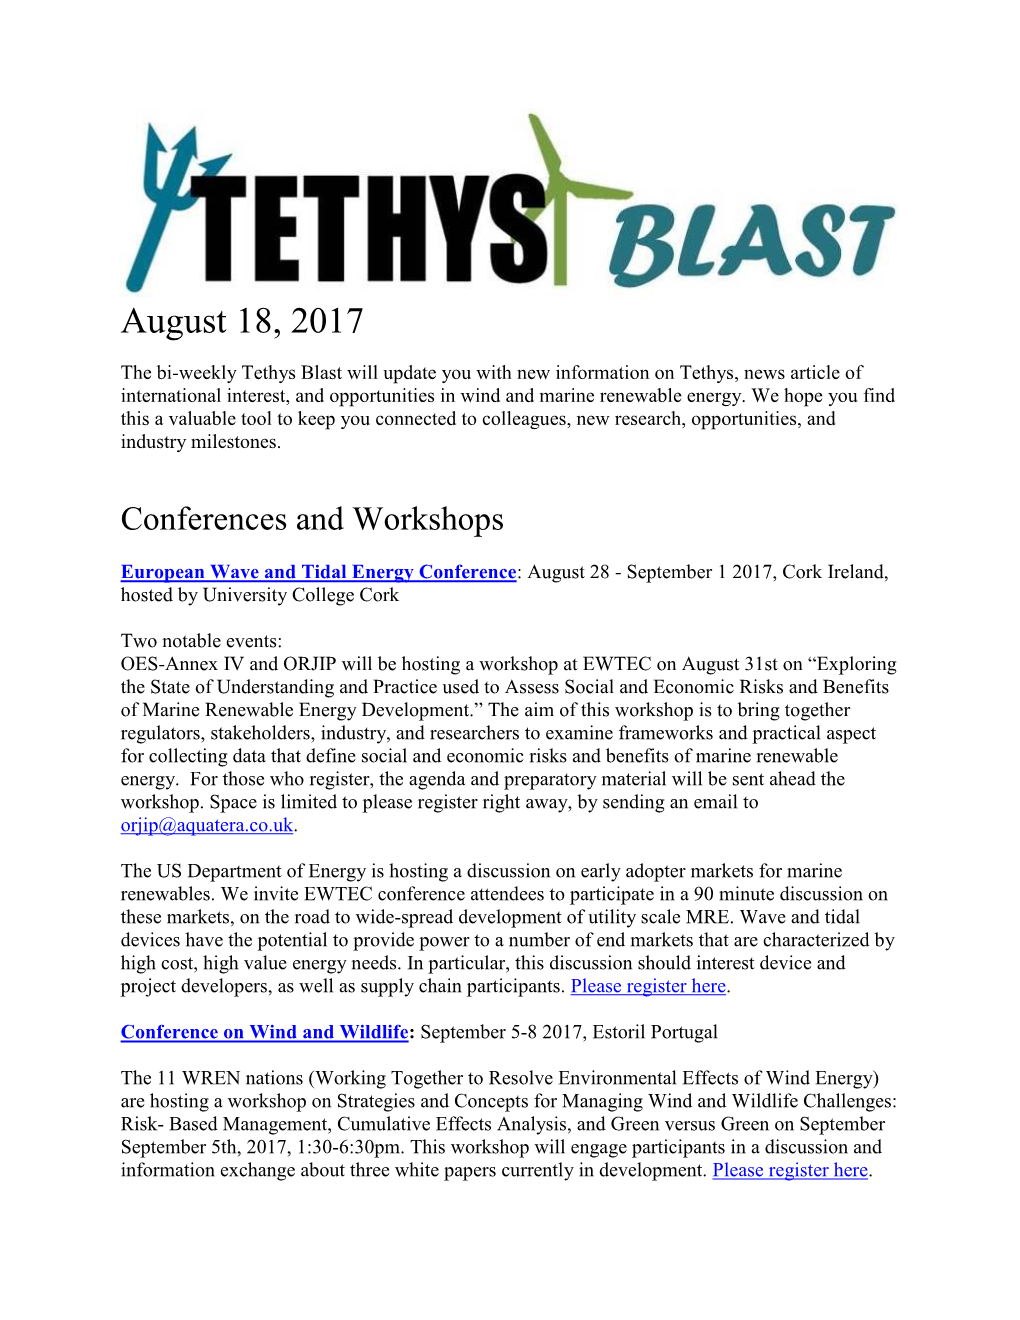 Tethys Blast Will Update You with New Information on Tethys, News Article of International Interest, and Opportunities in Wind and Marine Renewable Energy